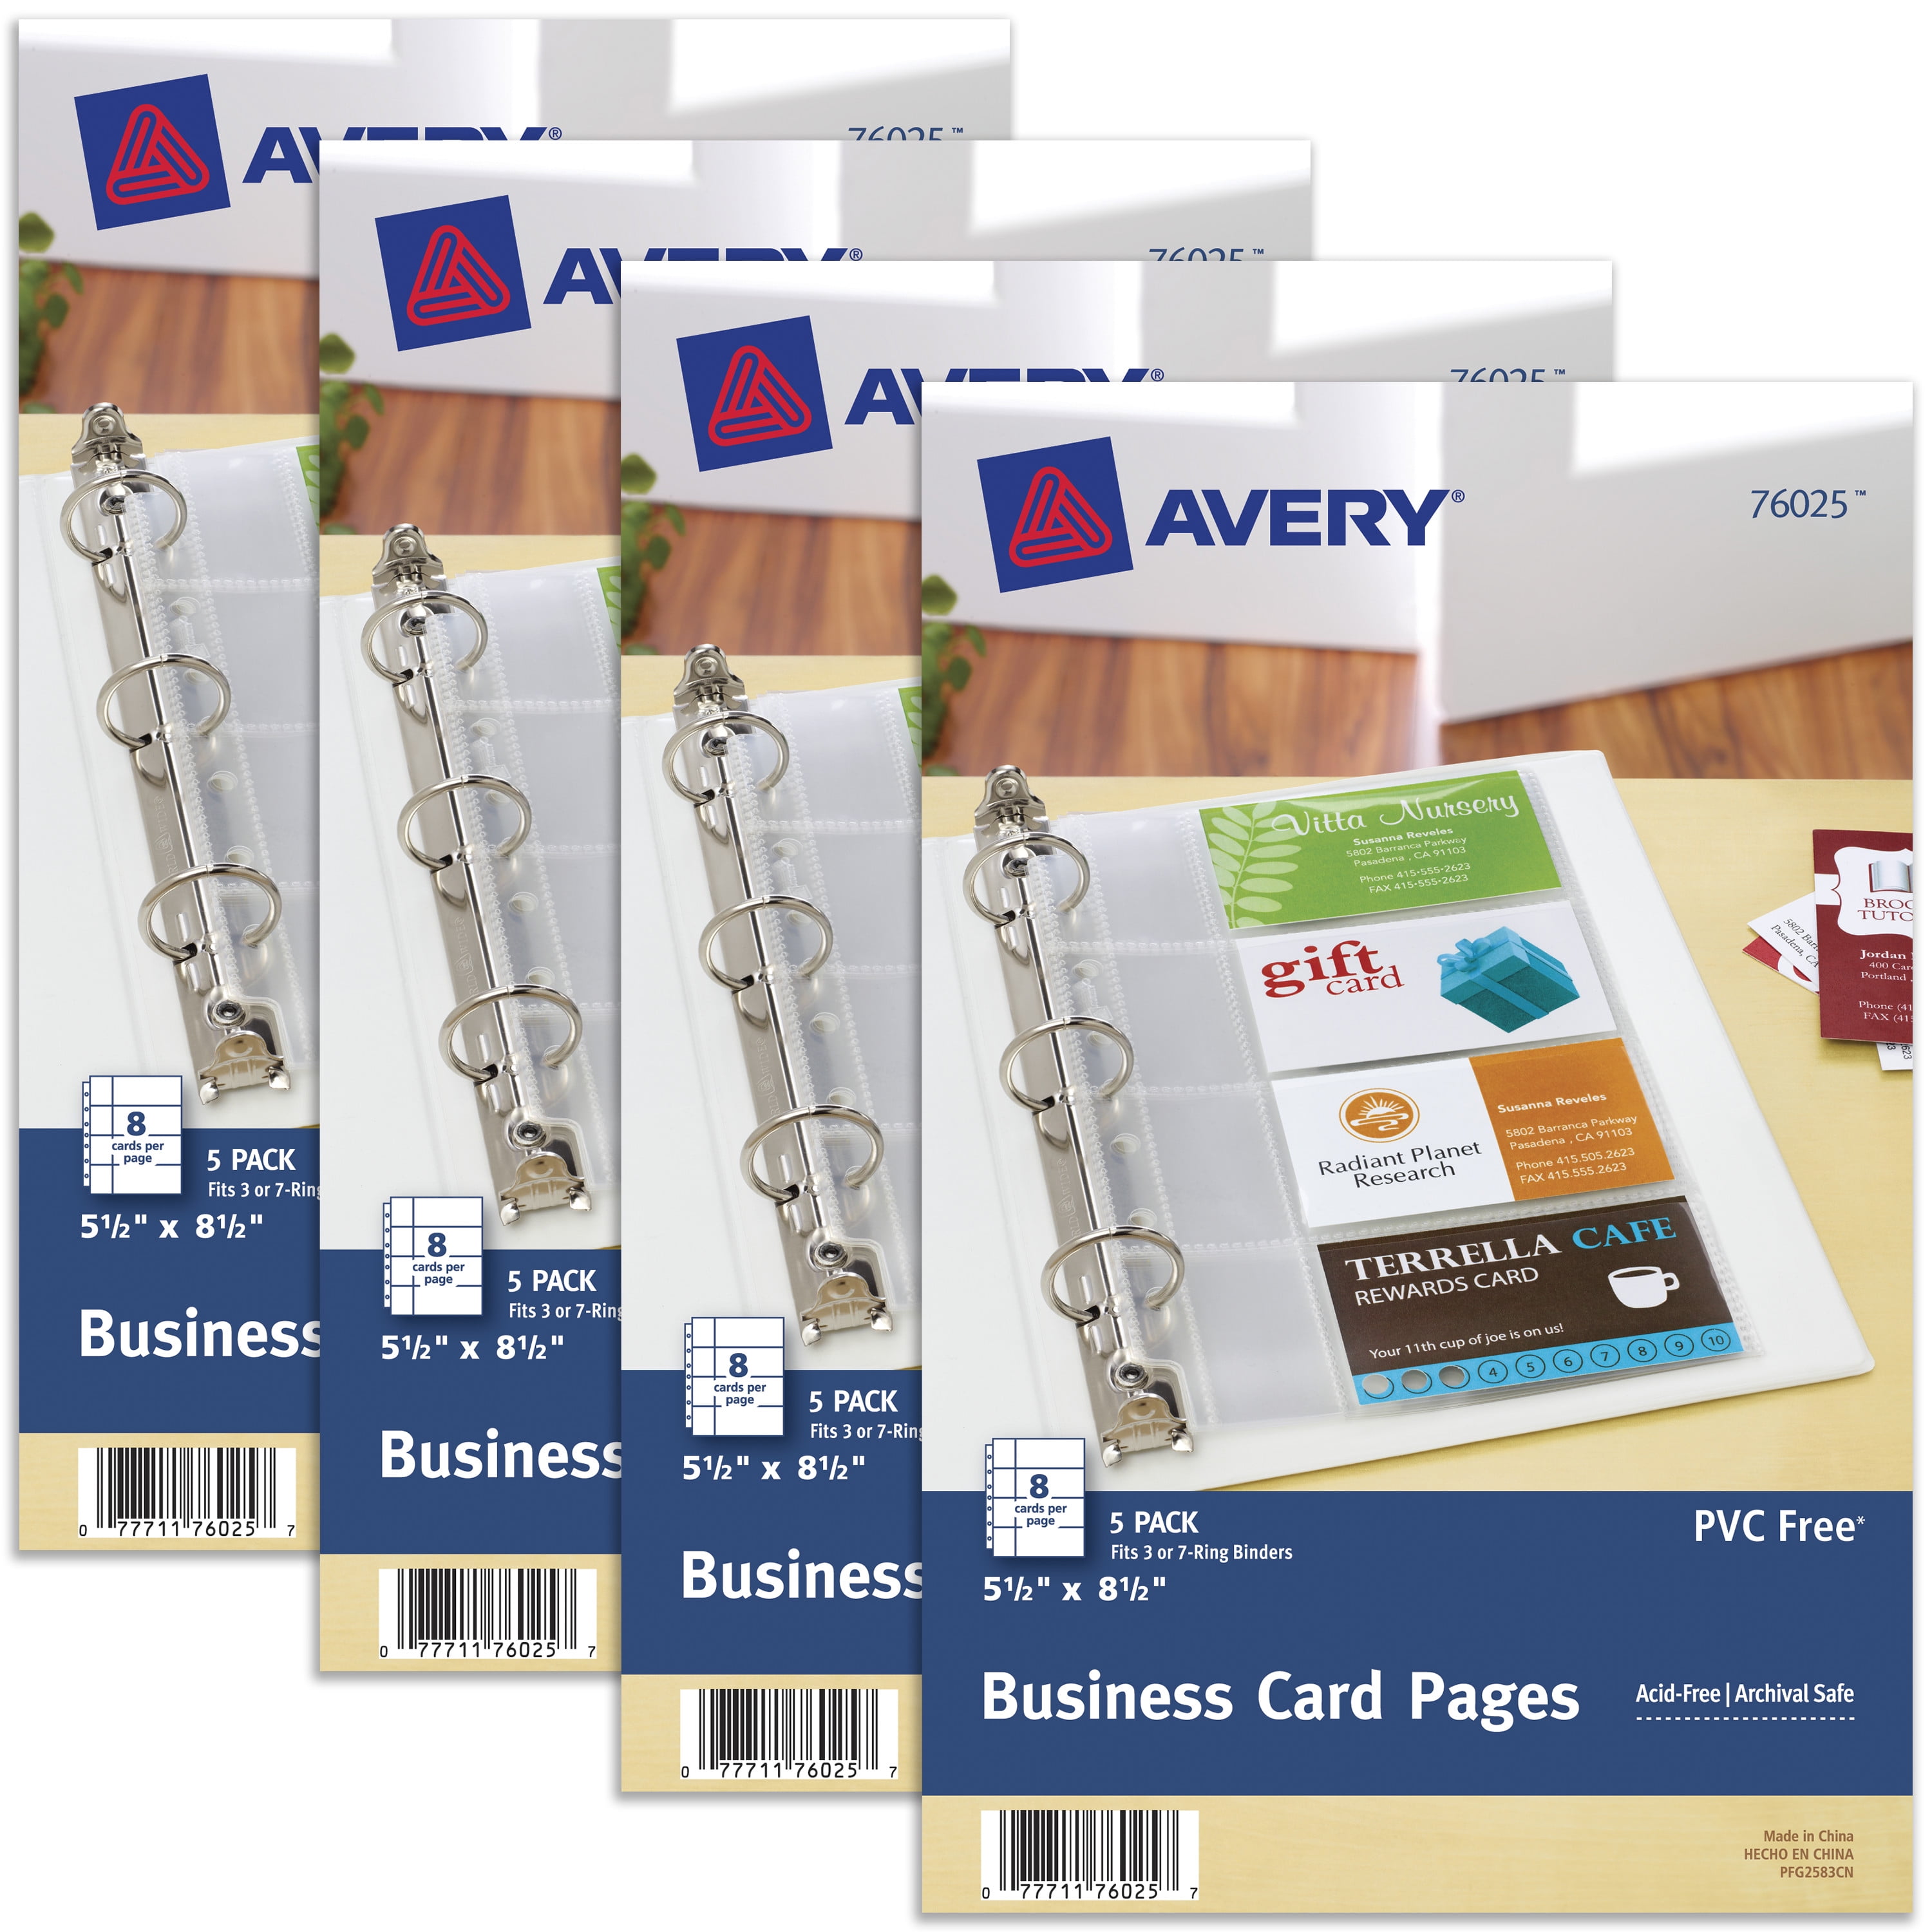 5.5 x 8.5 inches Clear Pack of 5 Avery Mini Business Card Pages 76025 